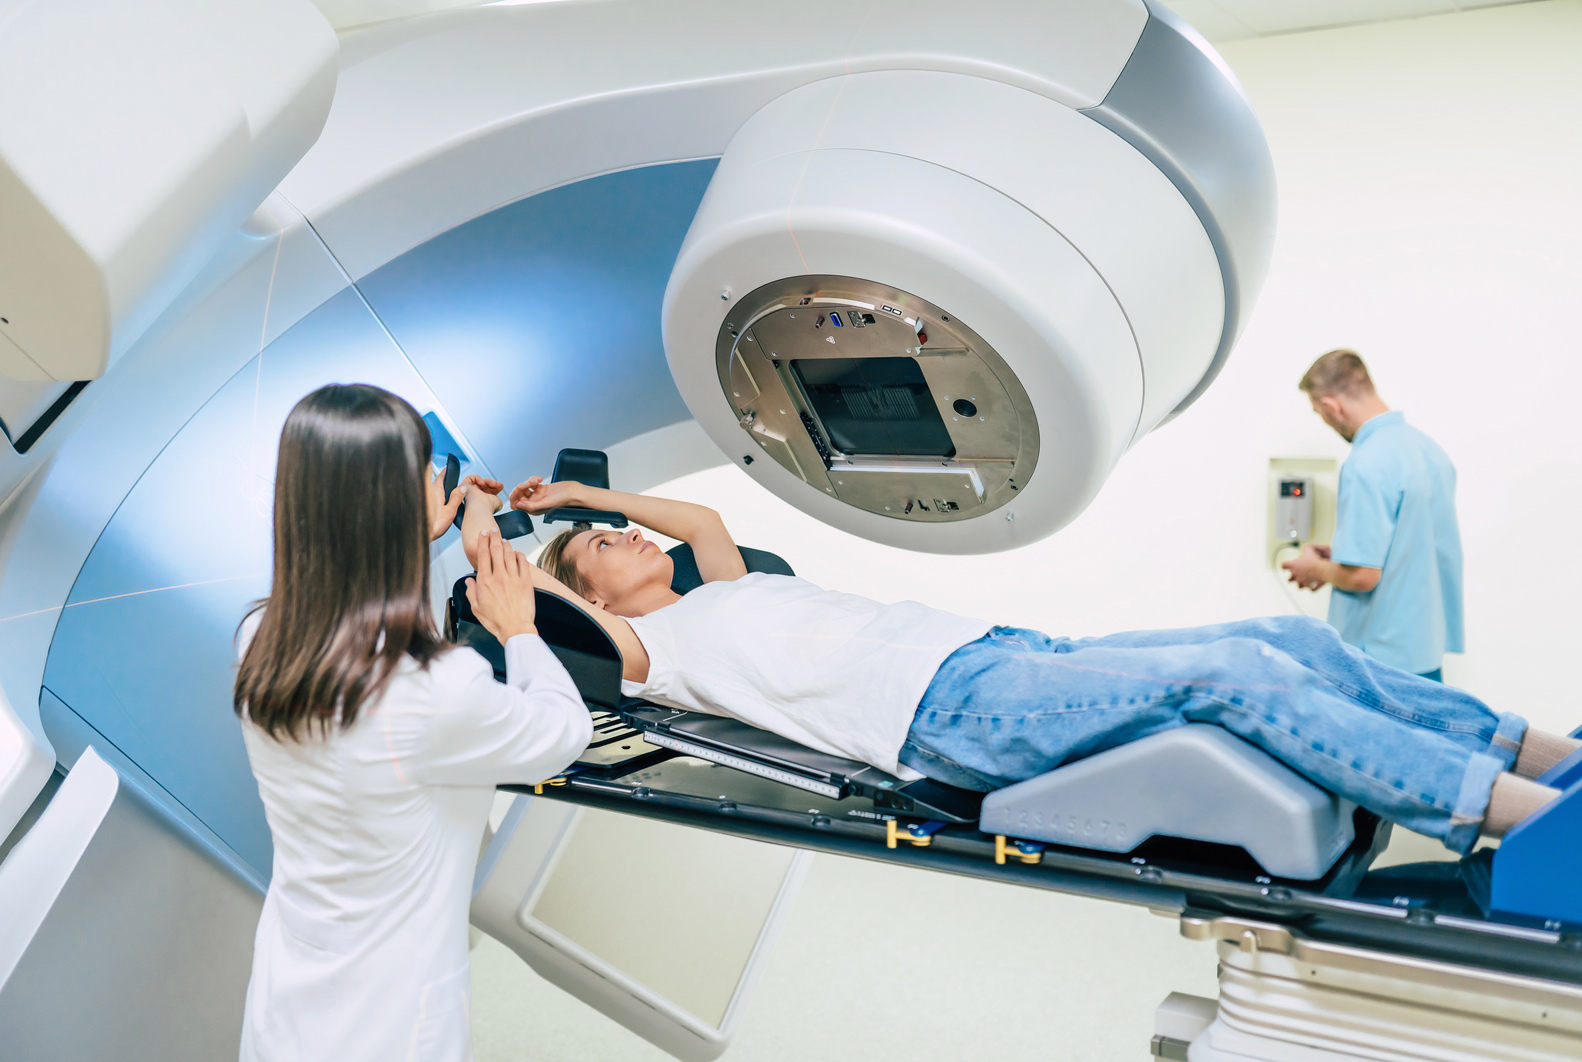 Featured Image for “Radiation Oncology”